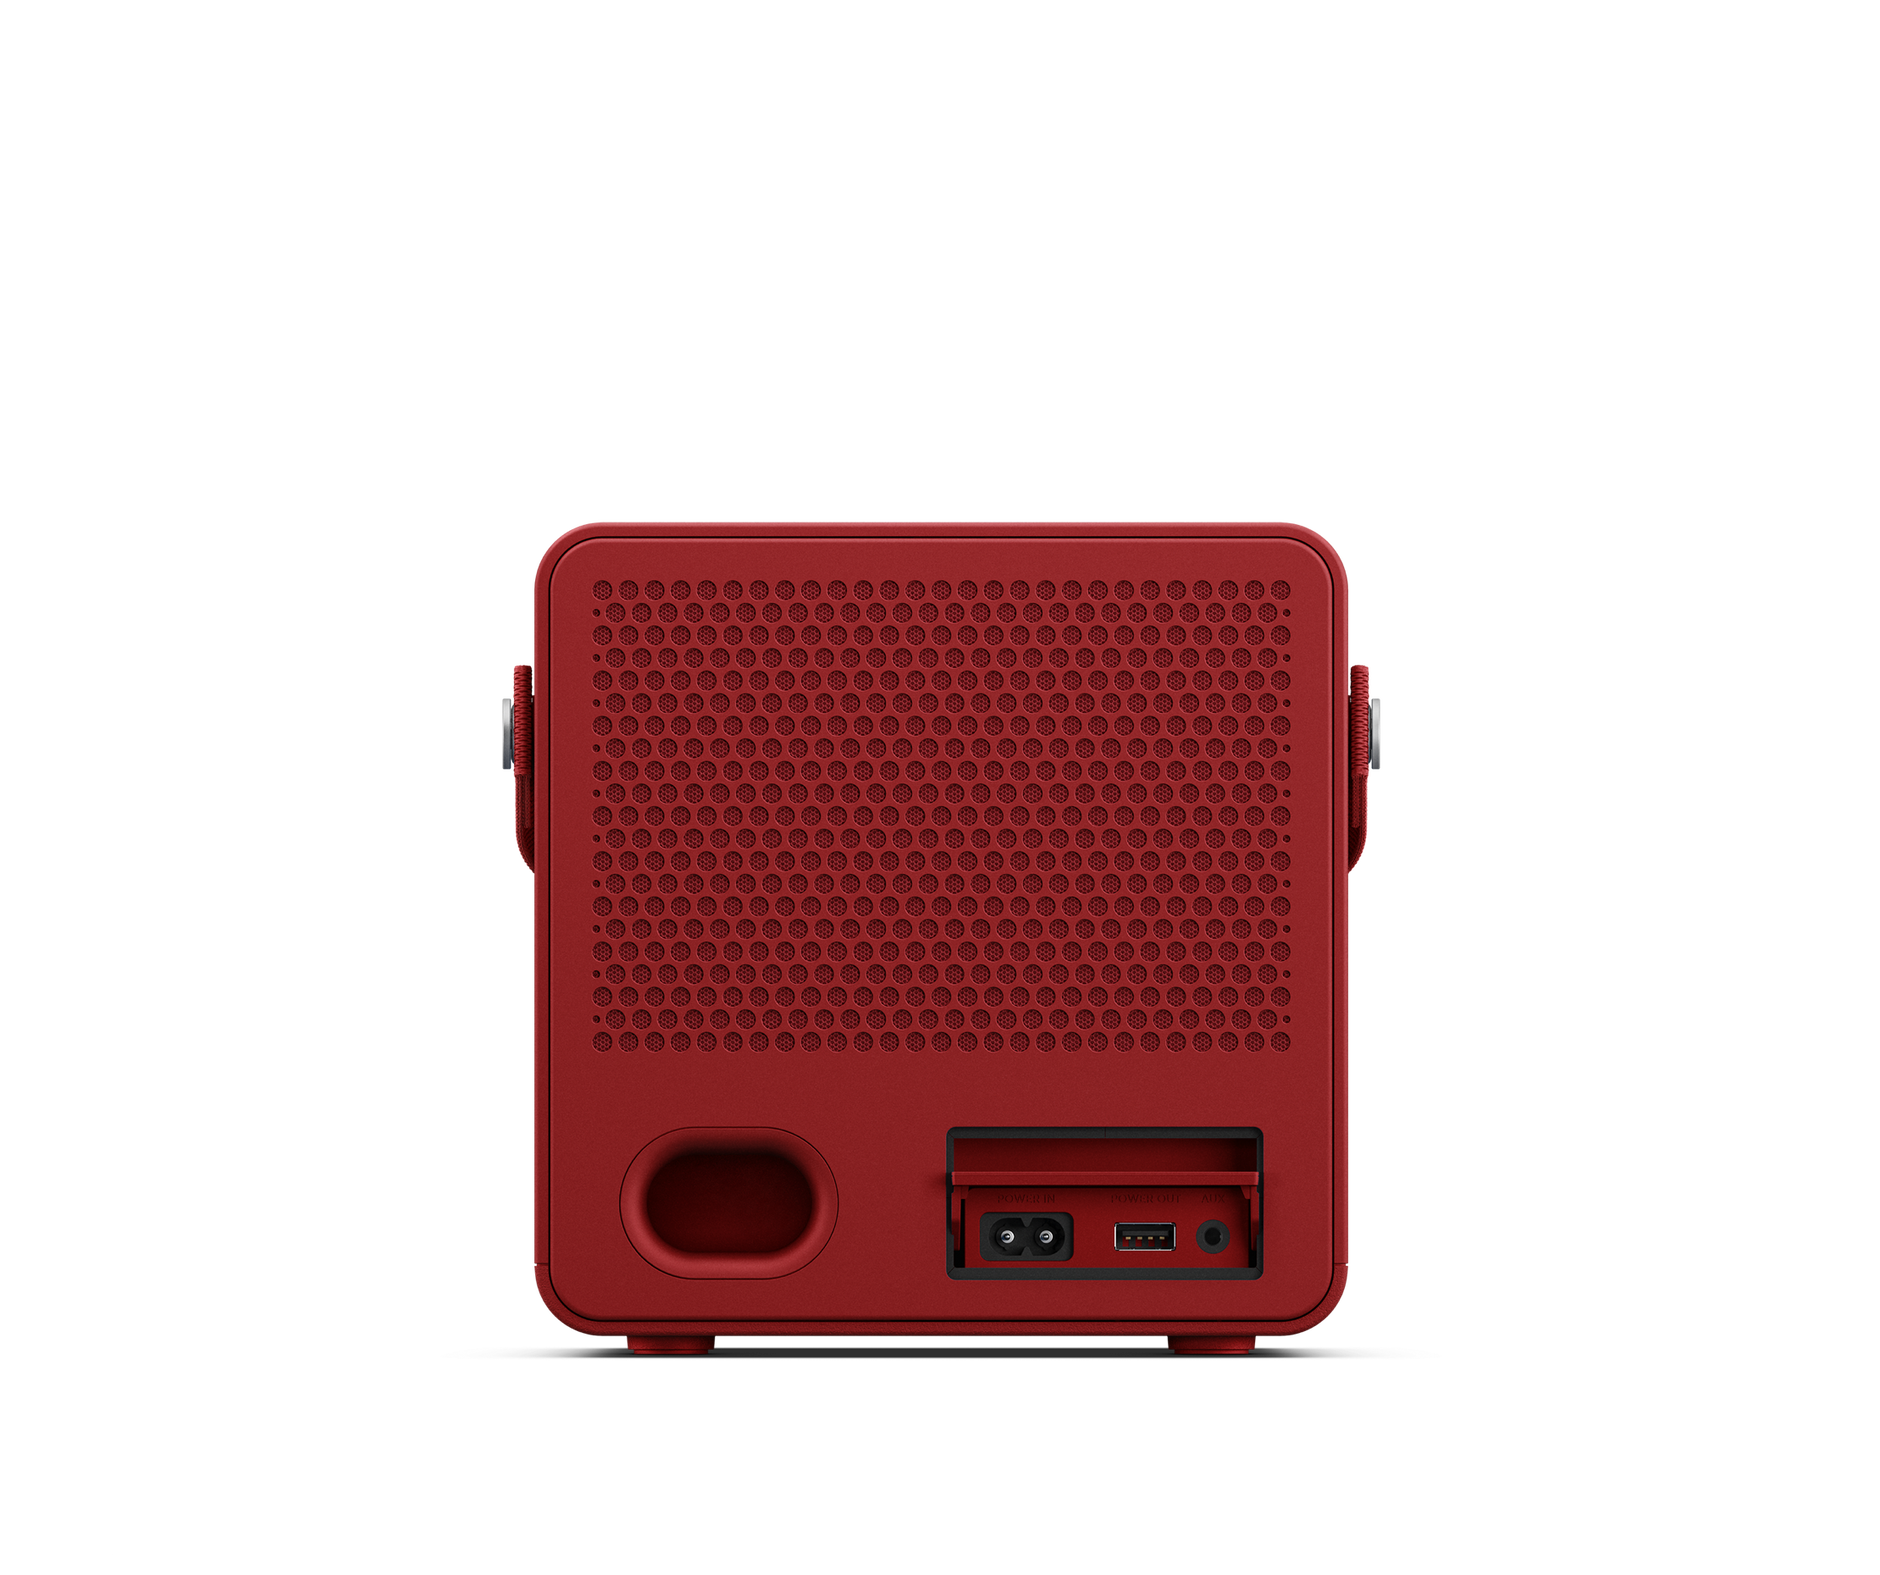 UE_ralis_product-large_red-4_3x.png